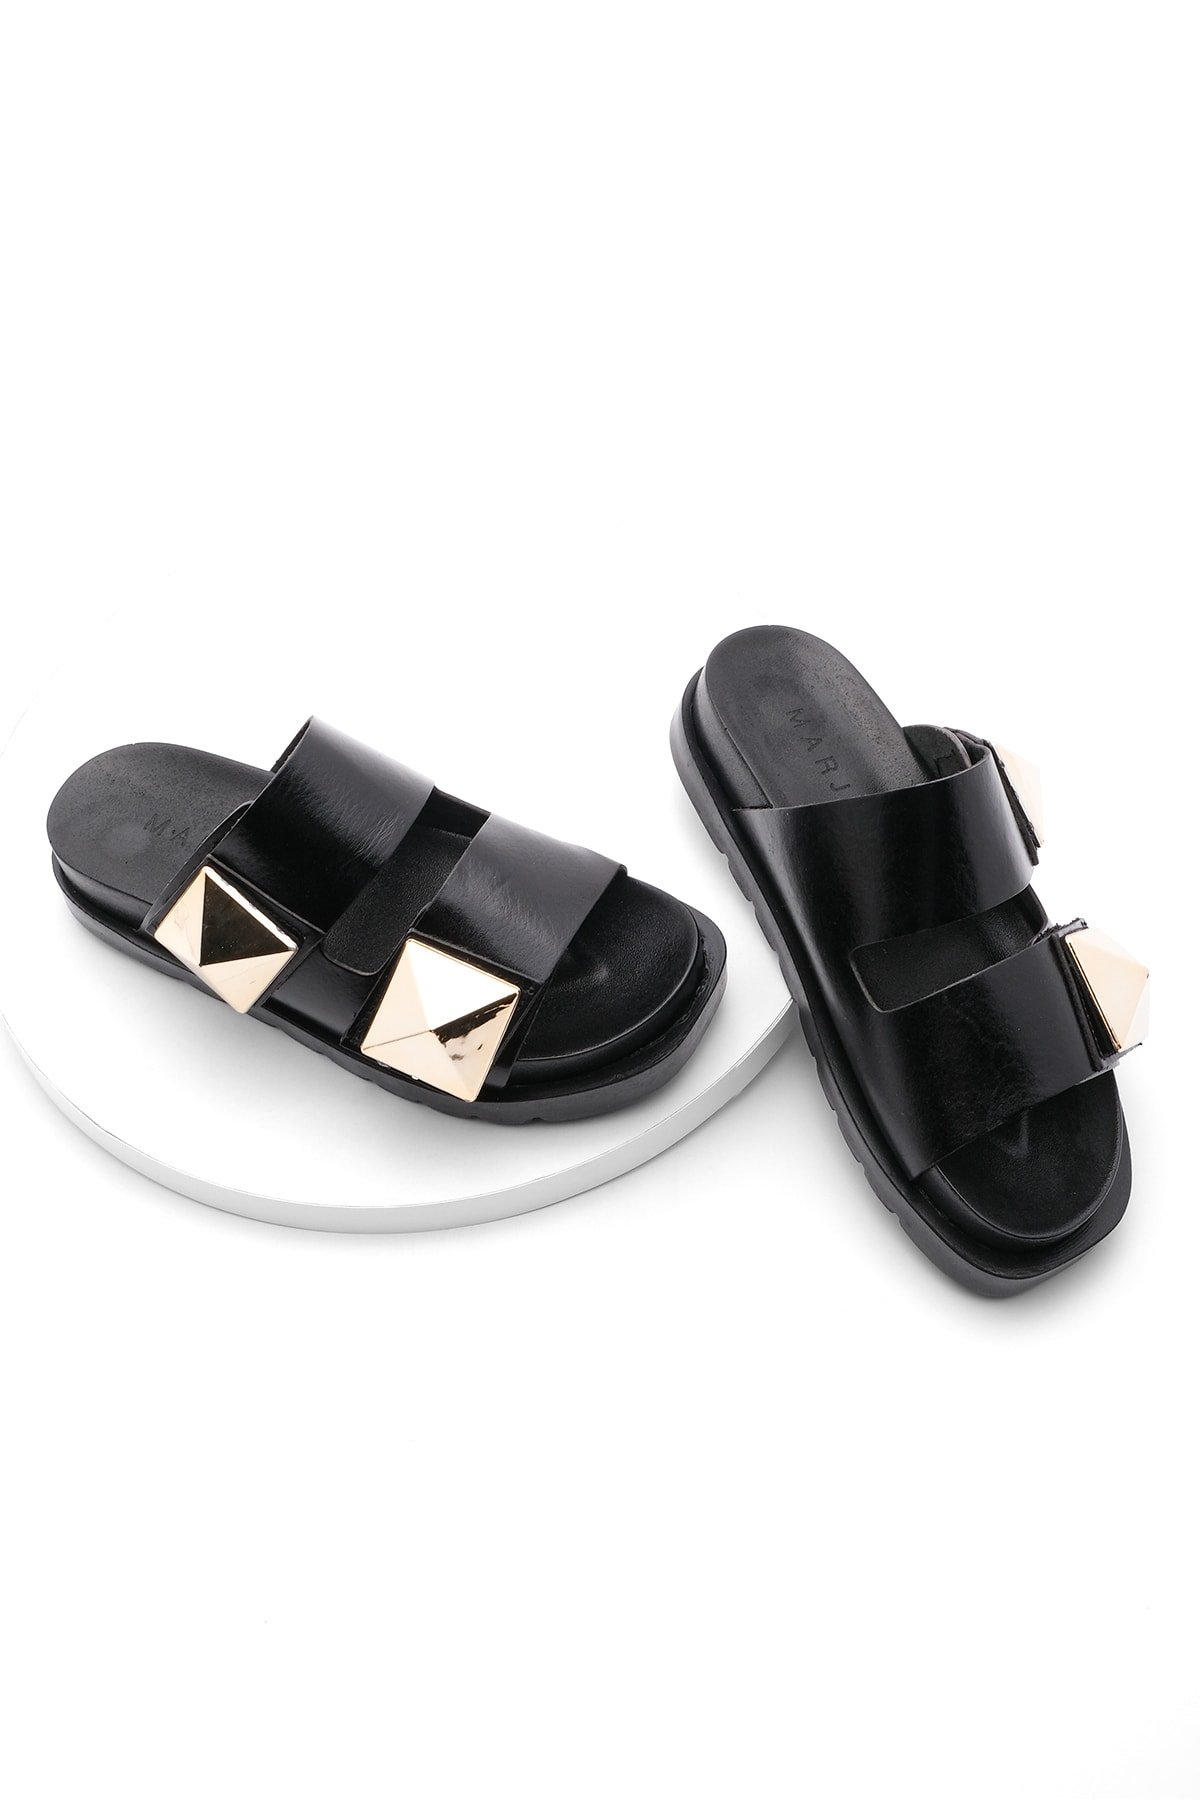 Marjin Women's Genuine Leather Daily Buckle and Velcro Slippers Foil Black.